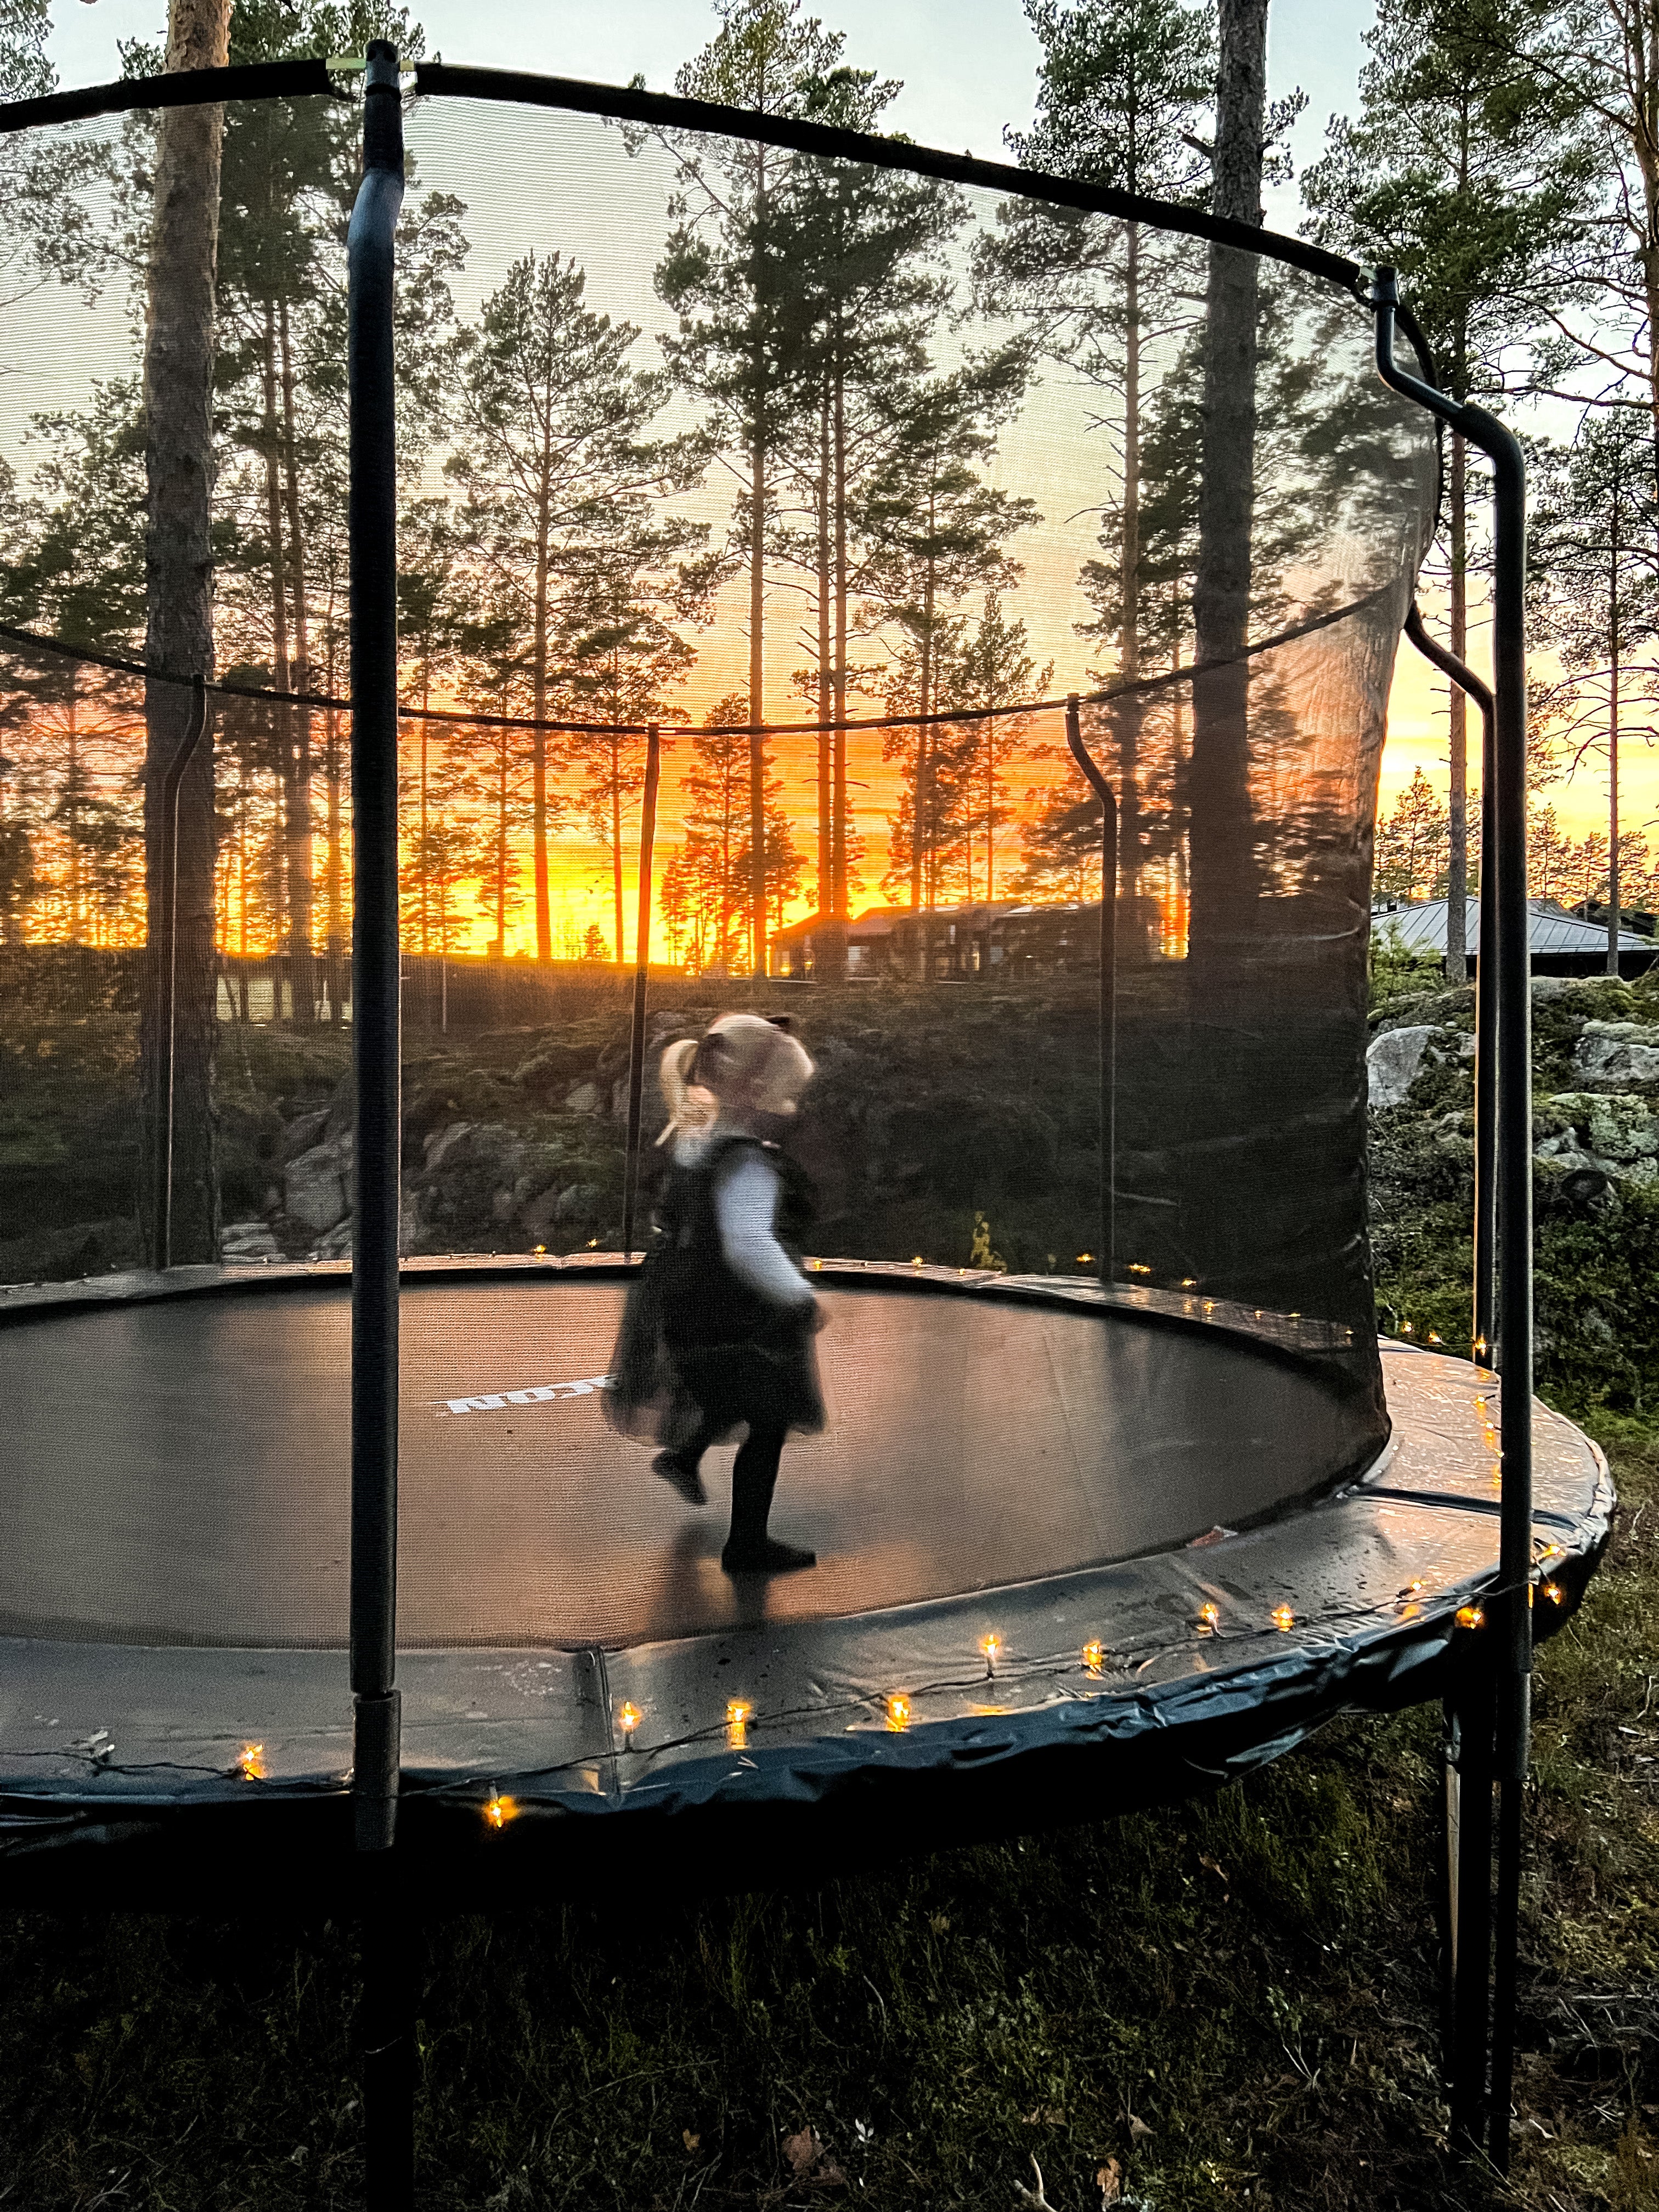 A little girl jumping on a round trampoline with enclosure